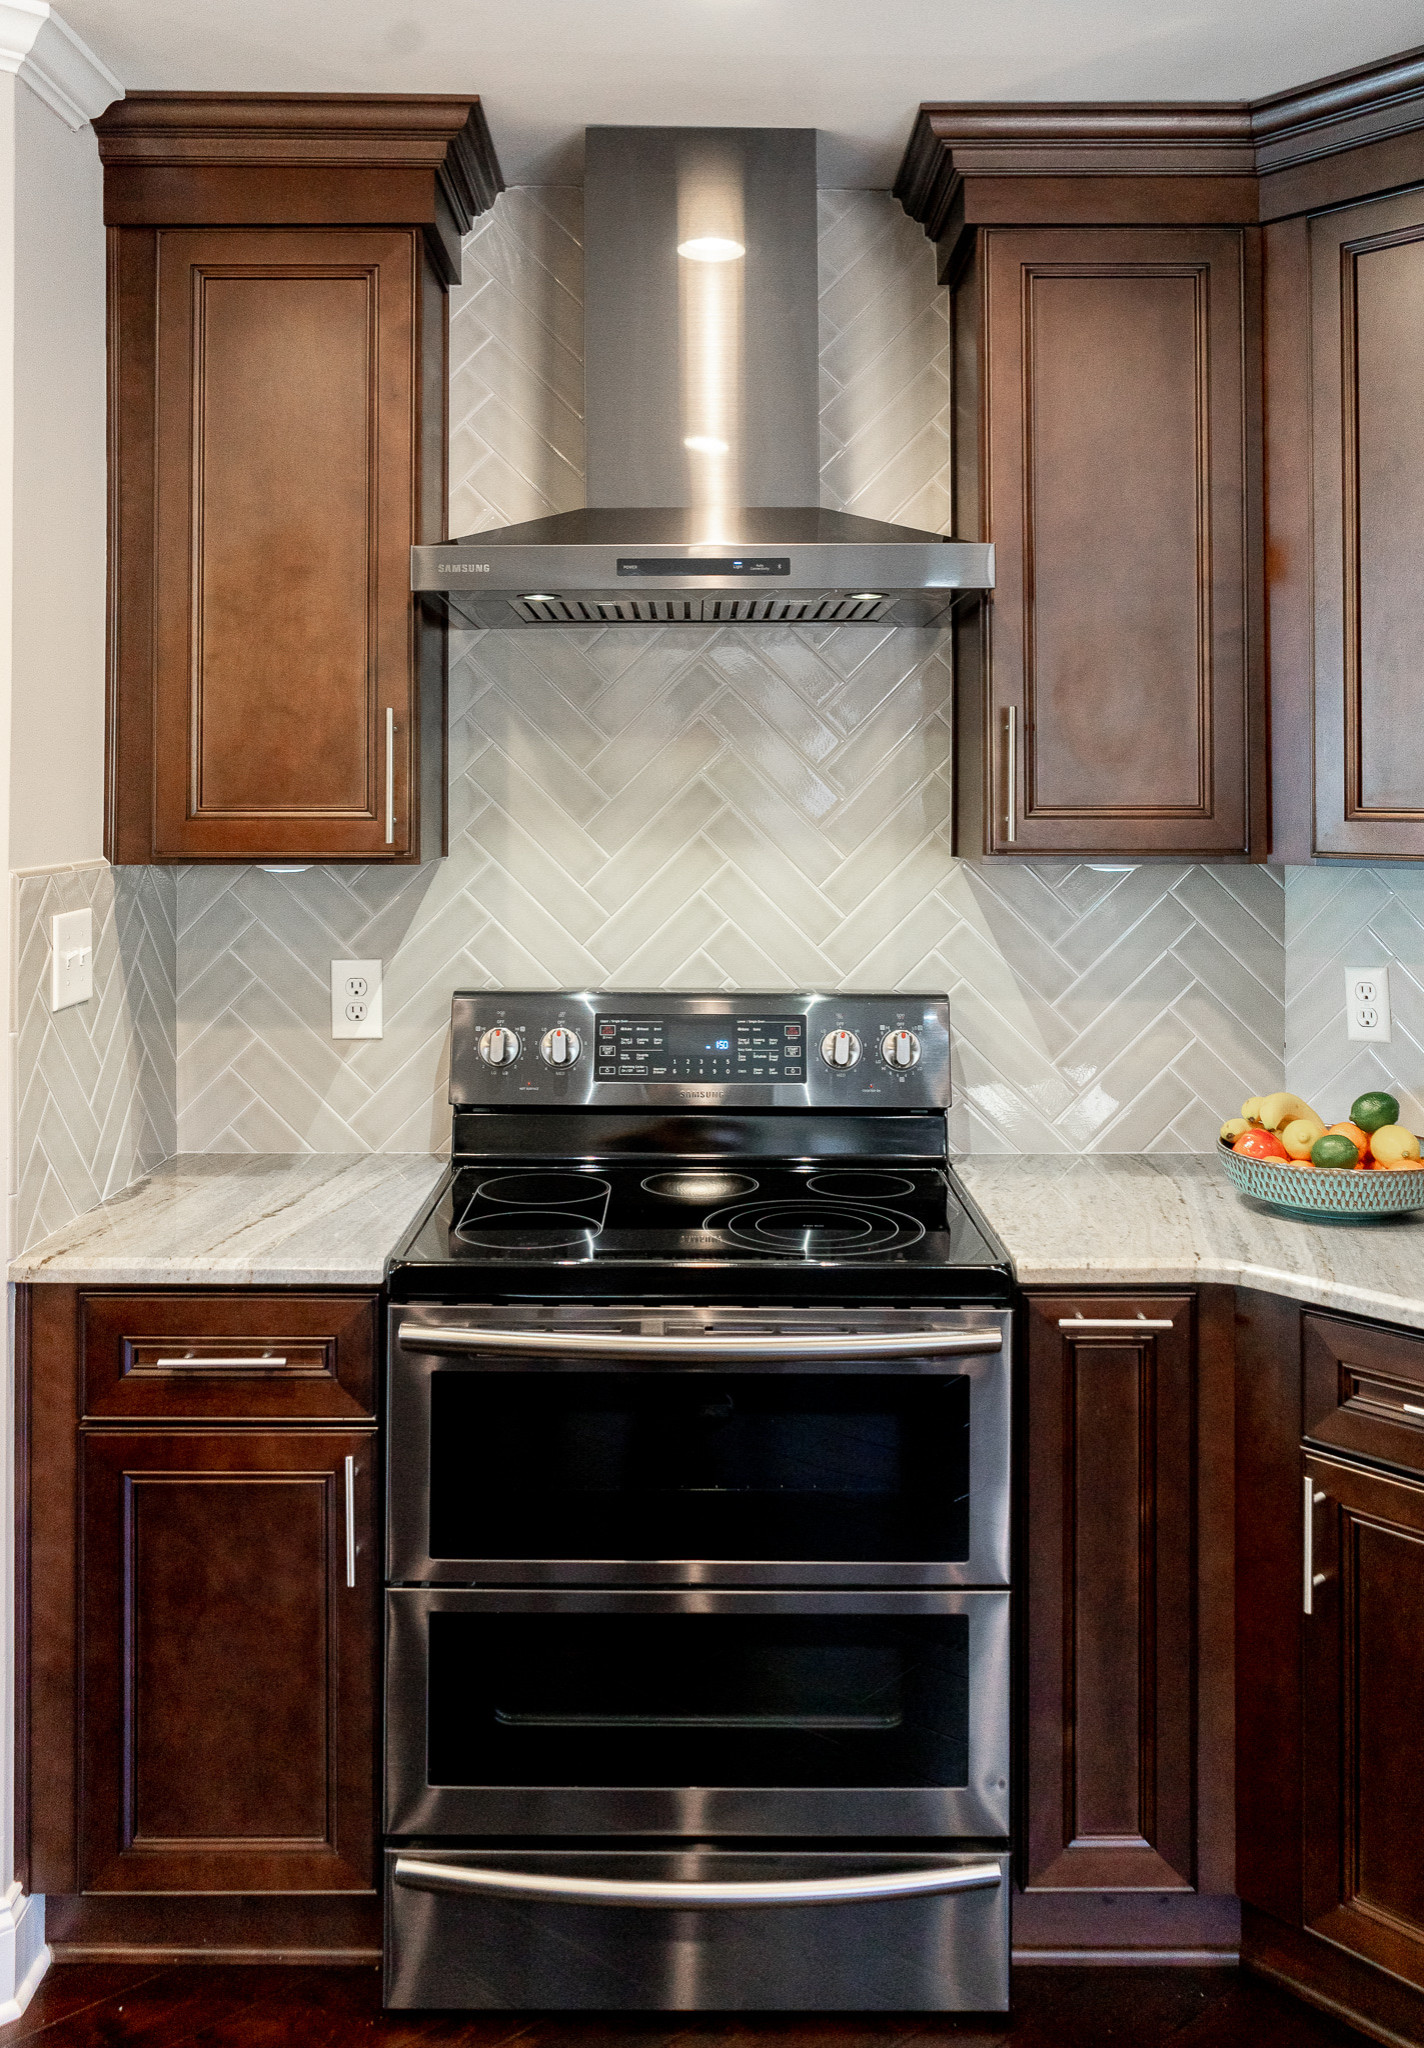 Peachtree City Transitional Kitchen Remodel